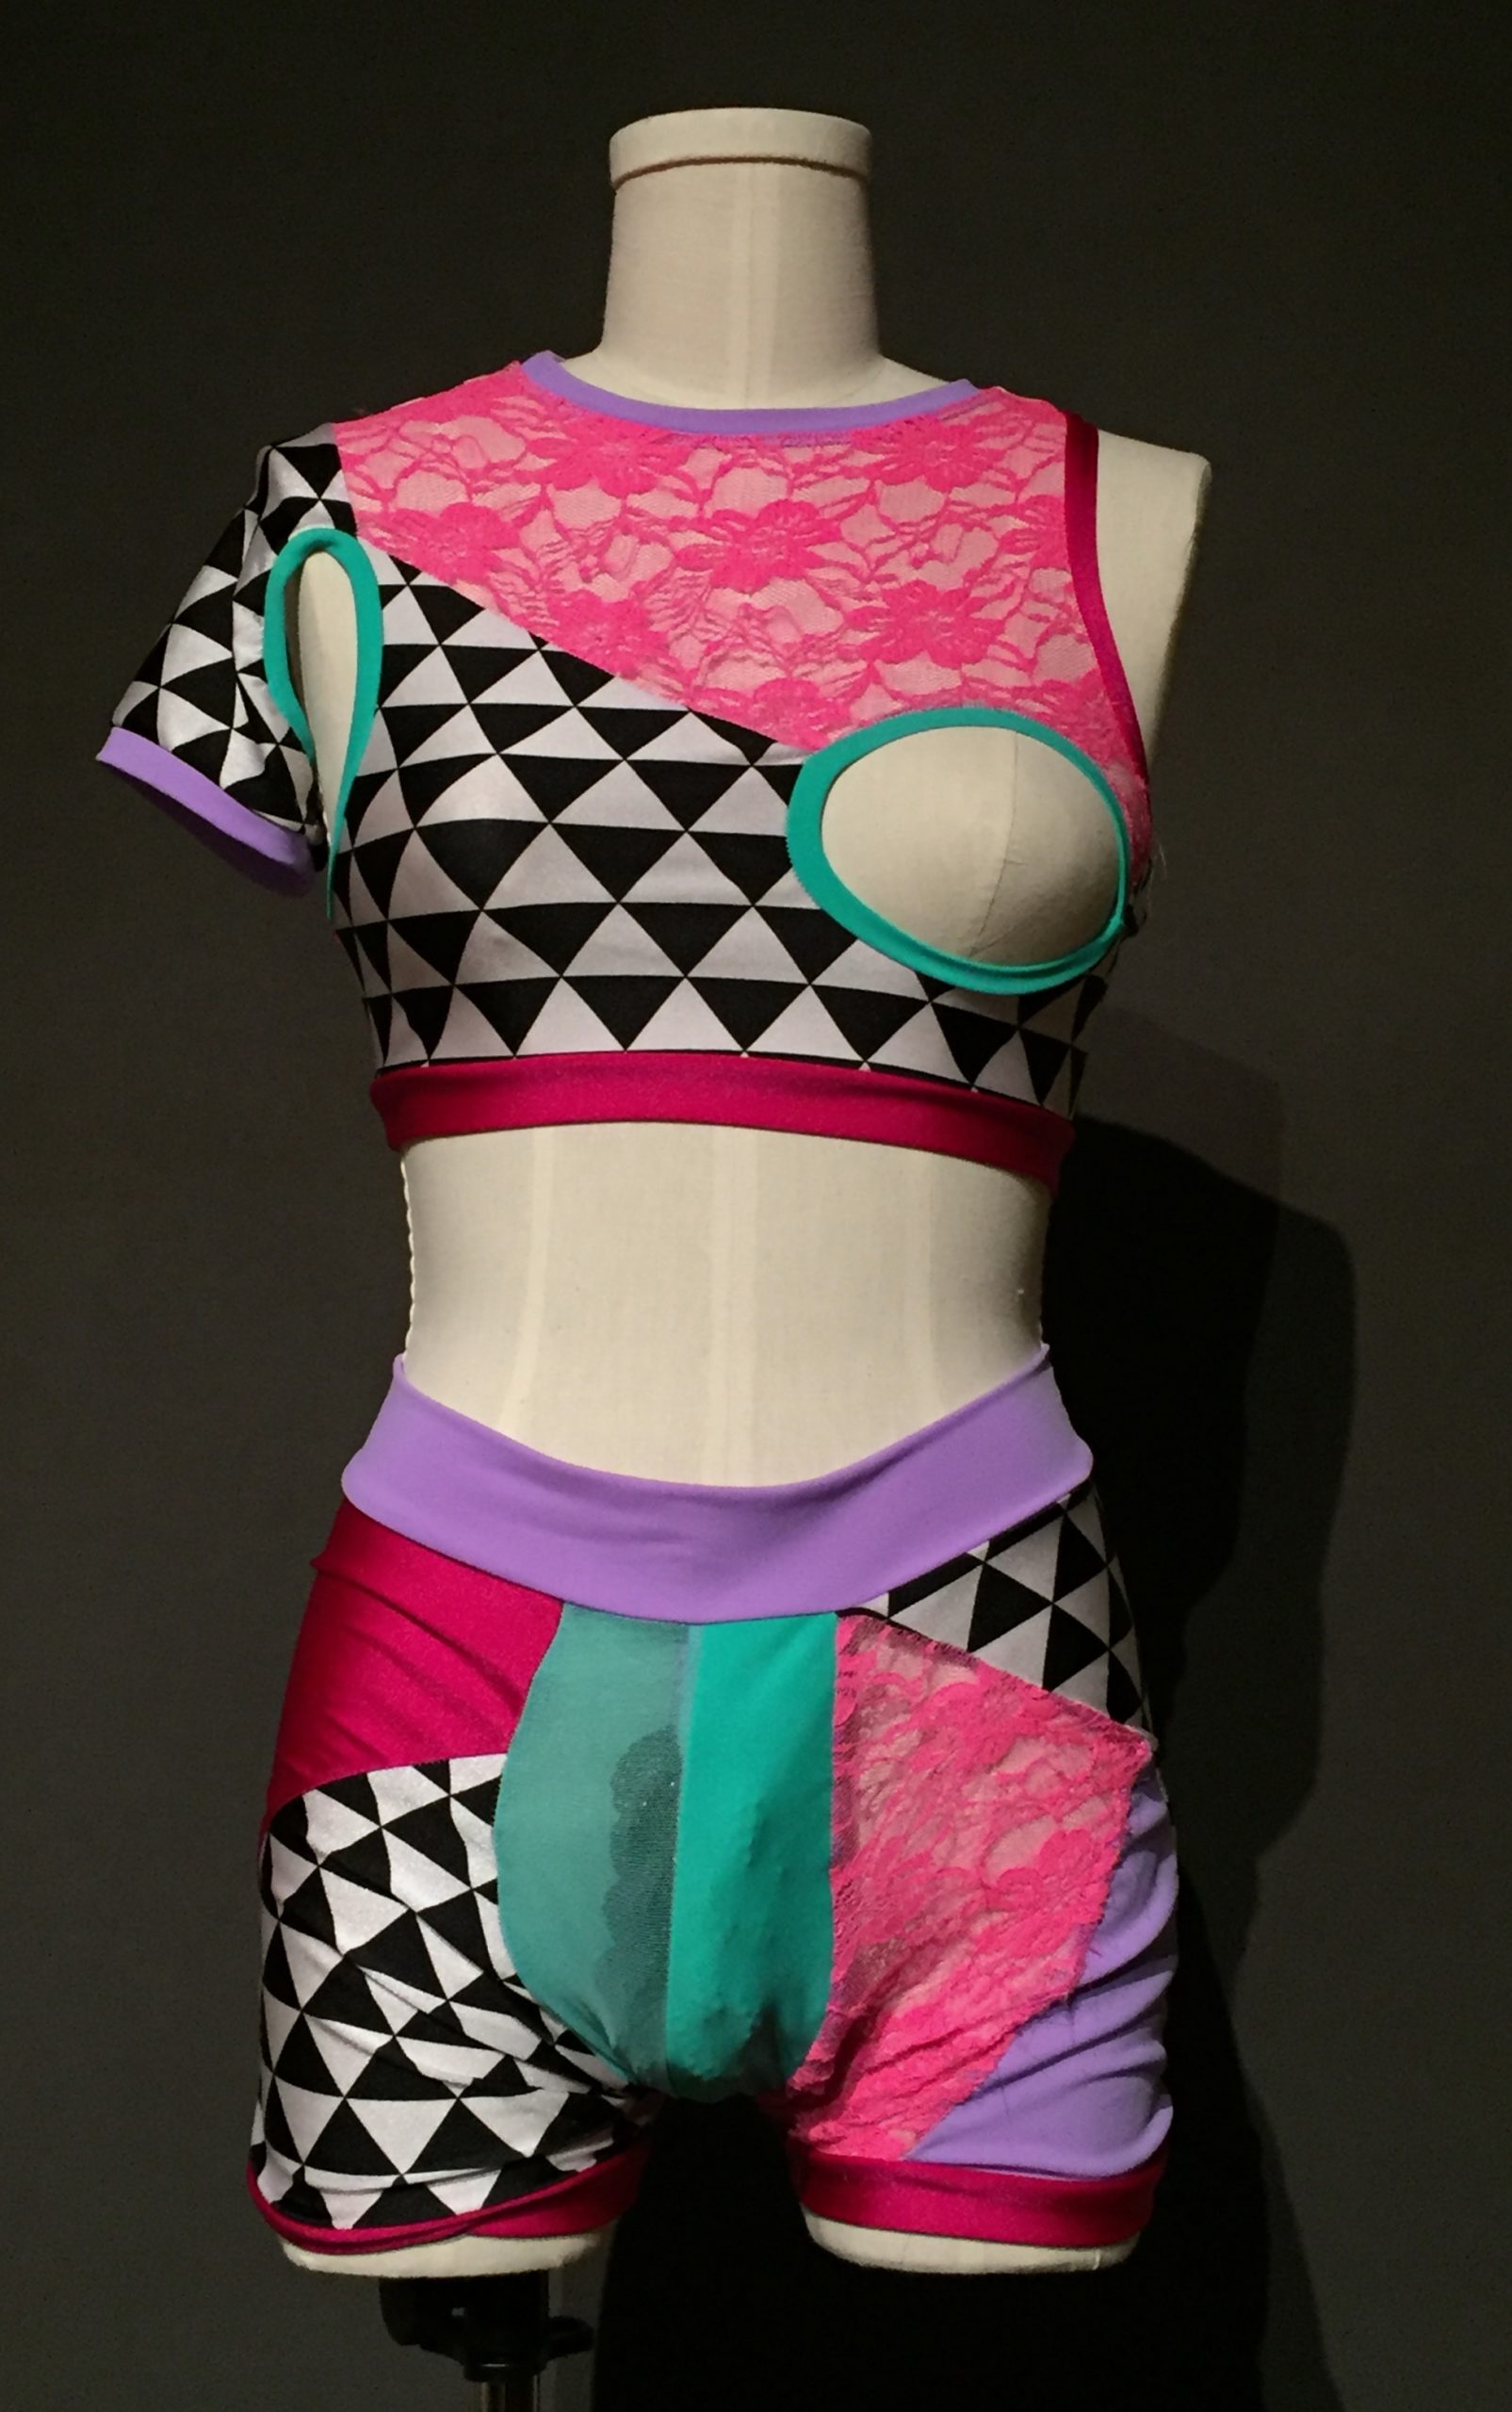 1980s-inspired multi colored lingerie top (featuring cutouts) and matching packing underwear